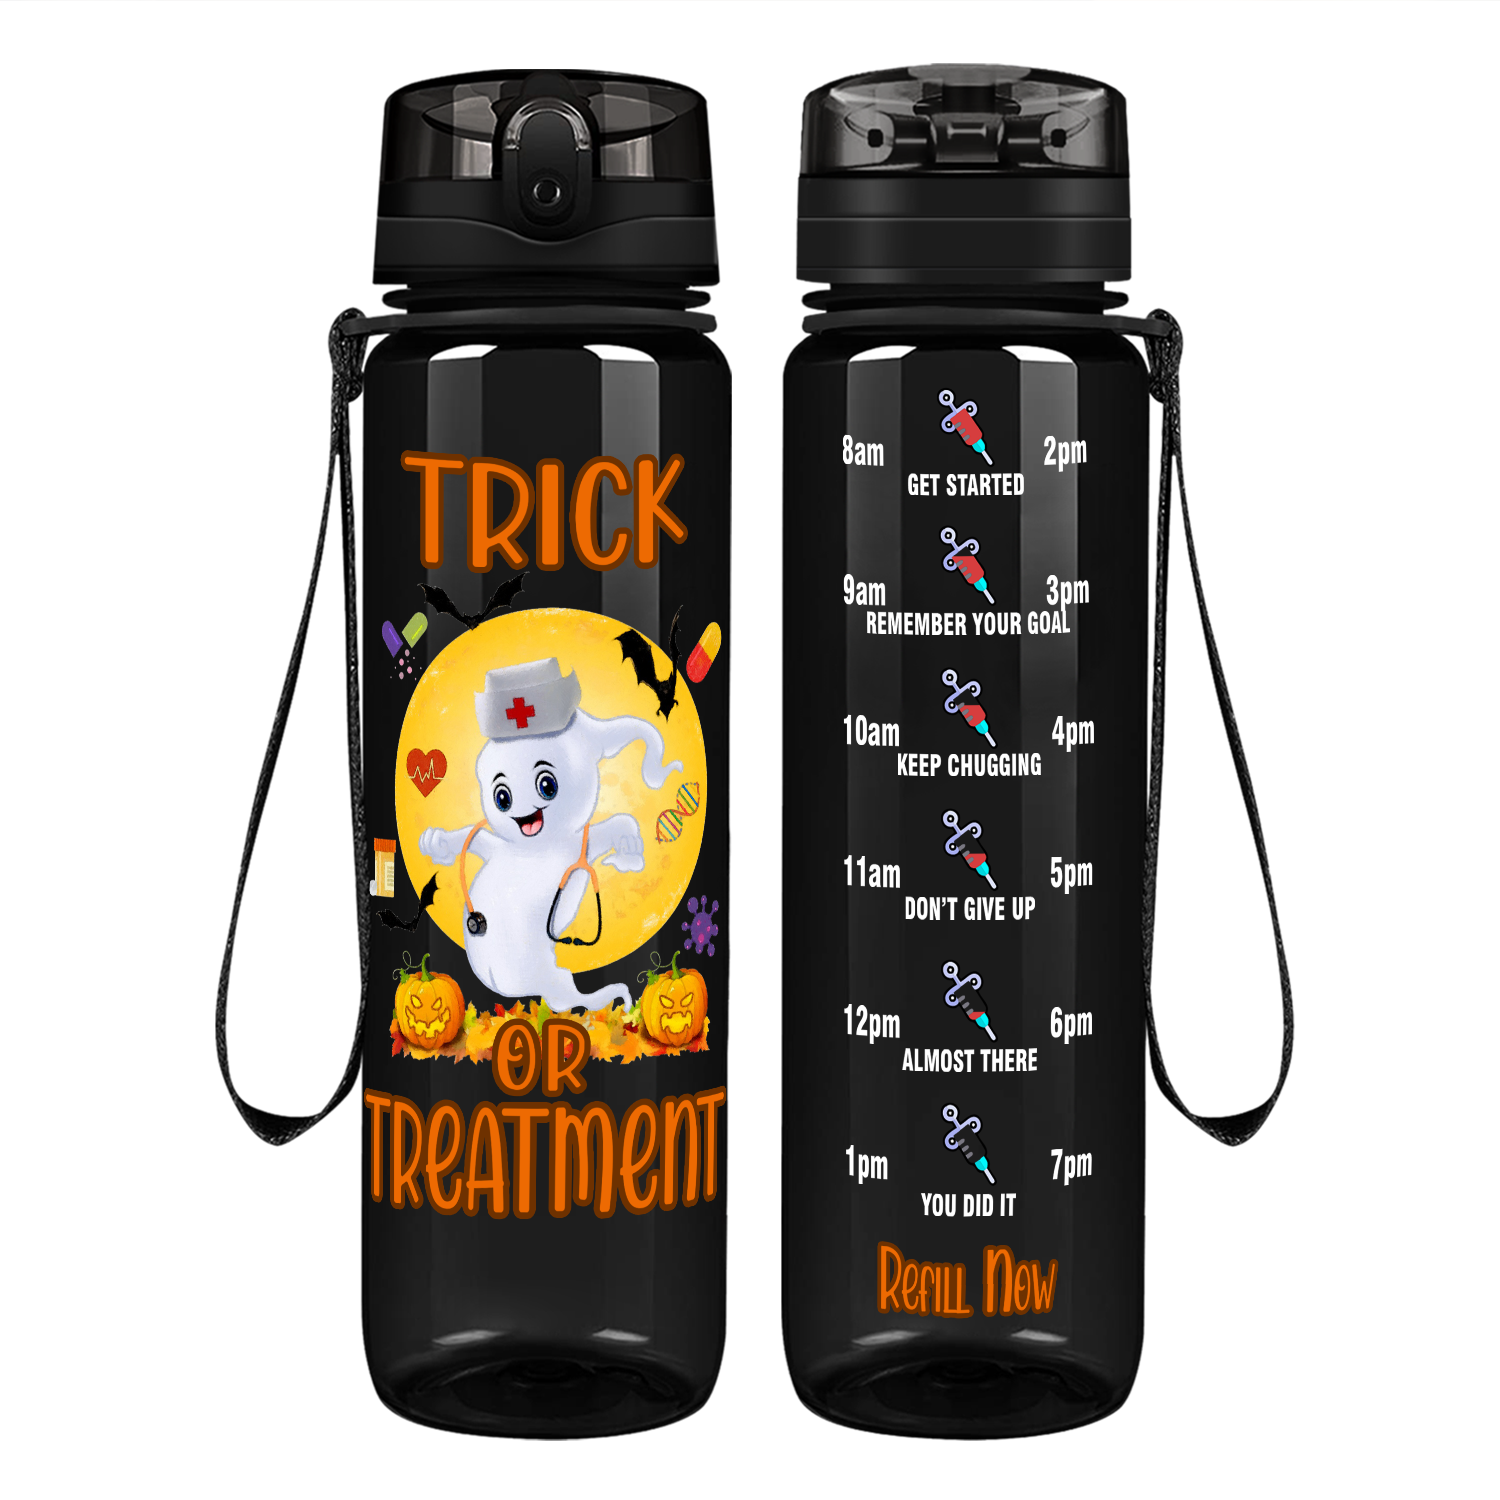 Trick or Treament on 32 oz Motivational Tracking Water Bottle